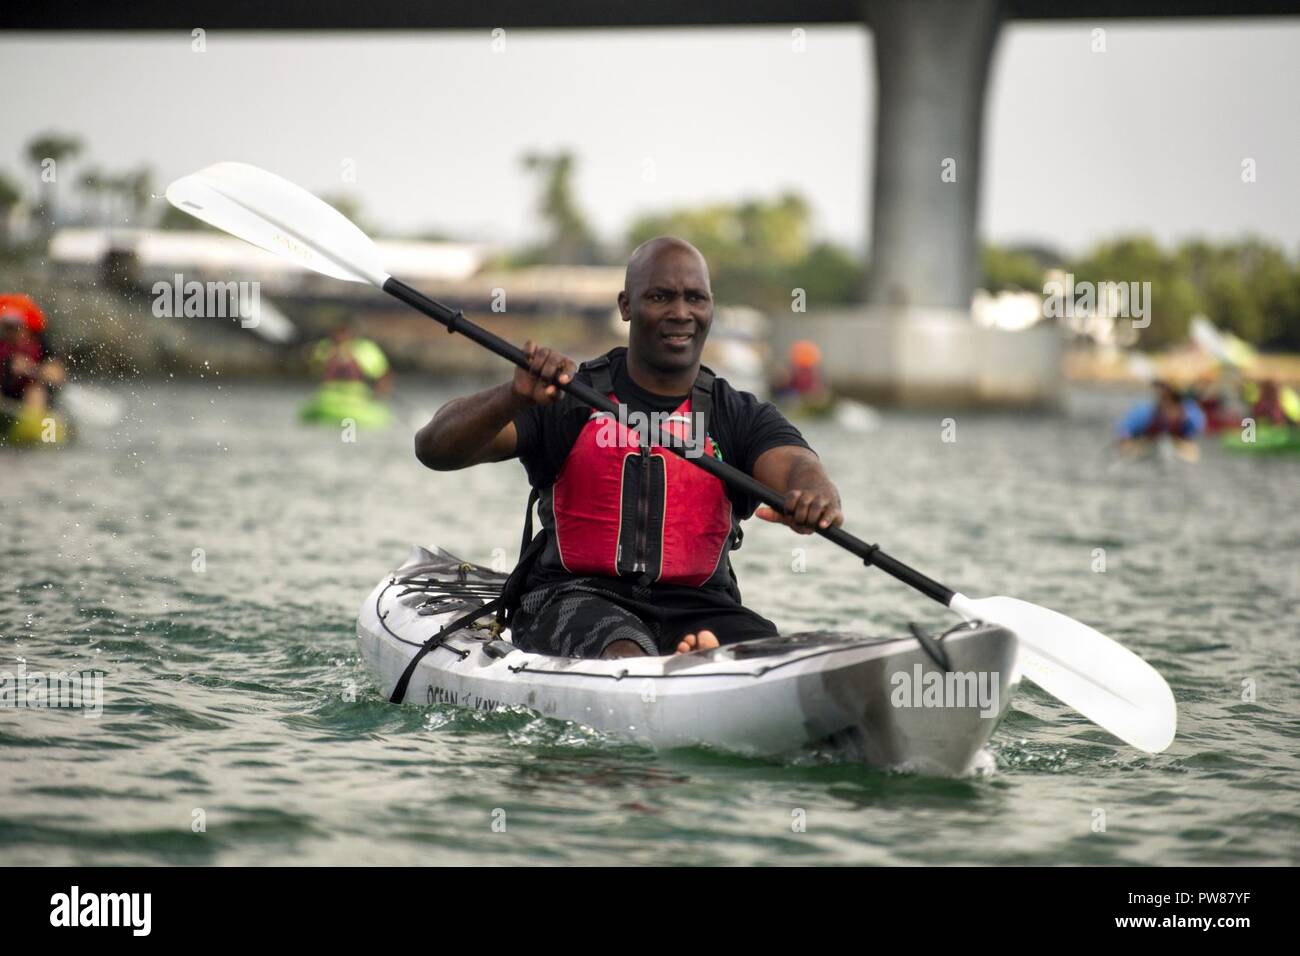 Navy Petty Officer 1st Class Michel Muller paddles a kayak in Mission Bay during an outing for Naval Medical Center San Diego patients in San Diego, Calif. Sept. 19, 2017. Stock Photo